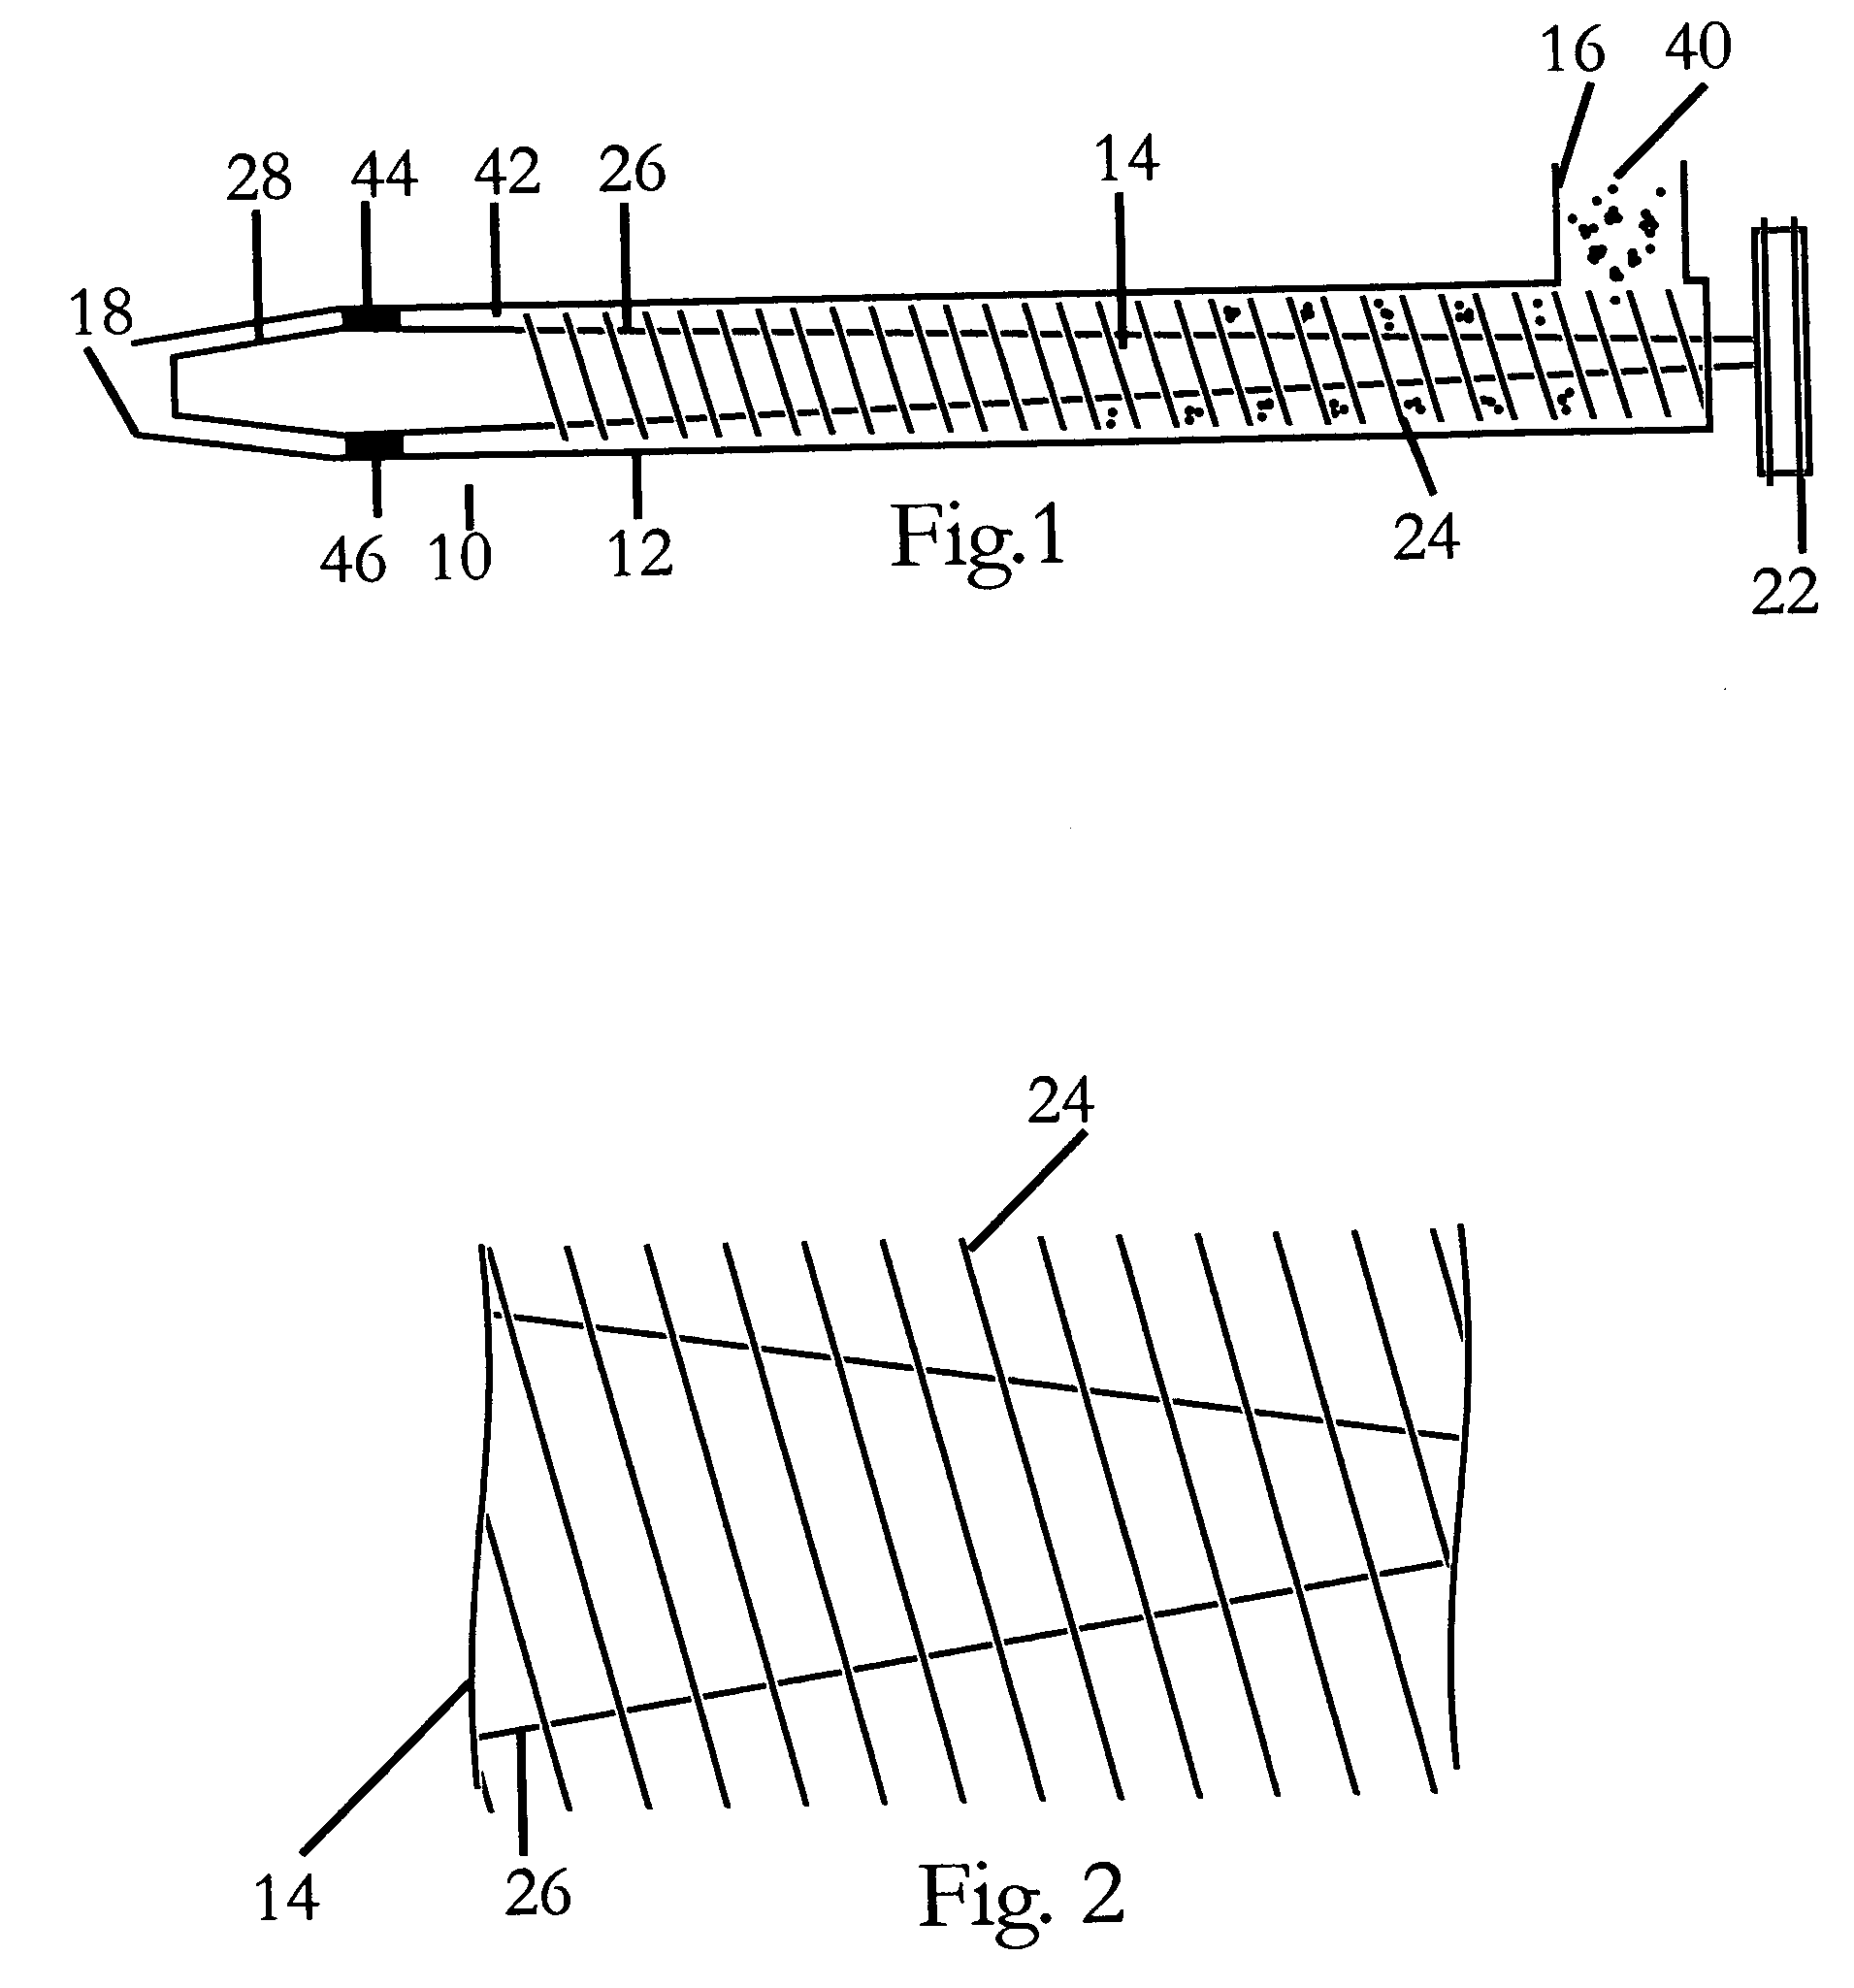 Wood gasification apparatus